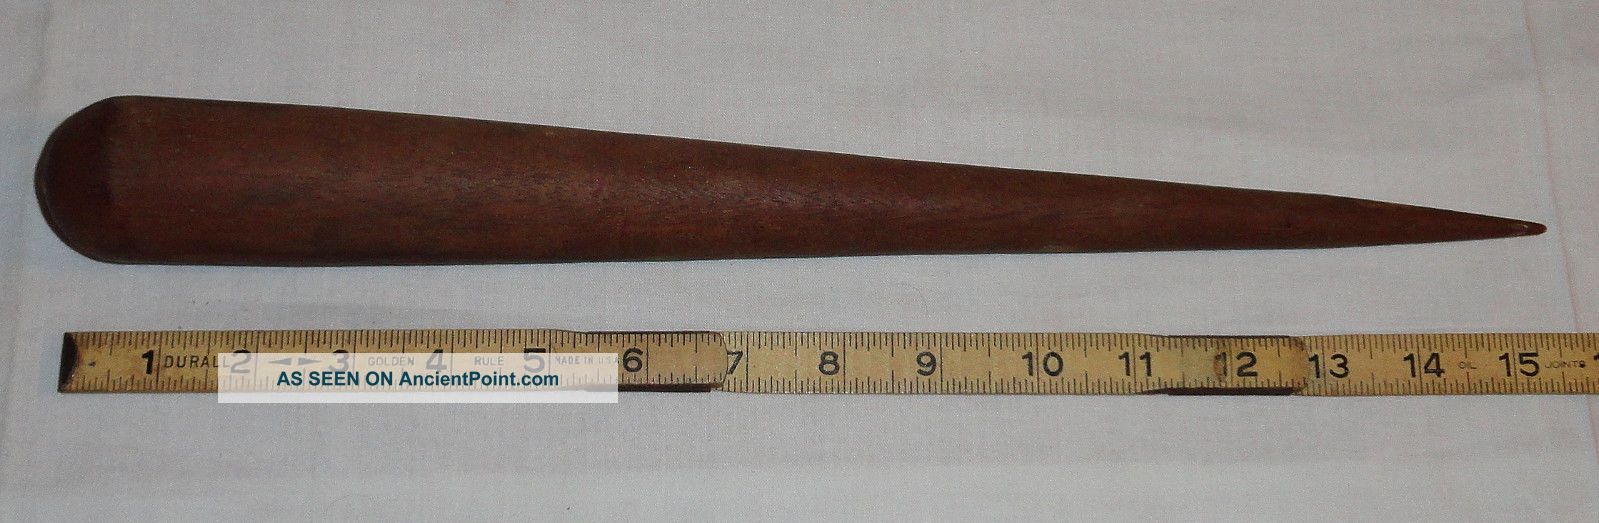 Antique Wood Mahogany 15 3/4” Fid Pin Nautical Rope Rigger Splicing Tool 1940s? Other Maritime Antiques photo